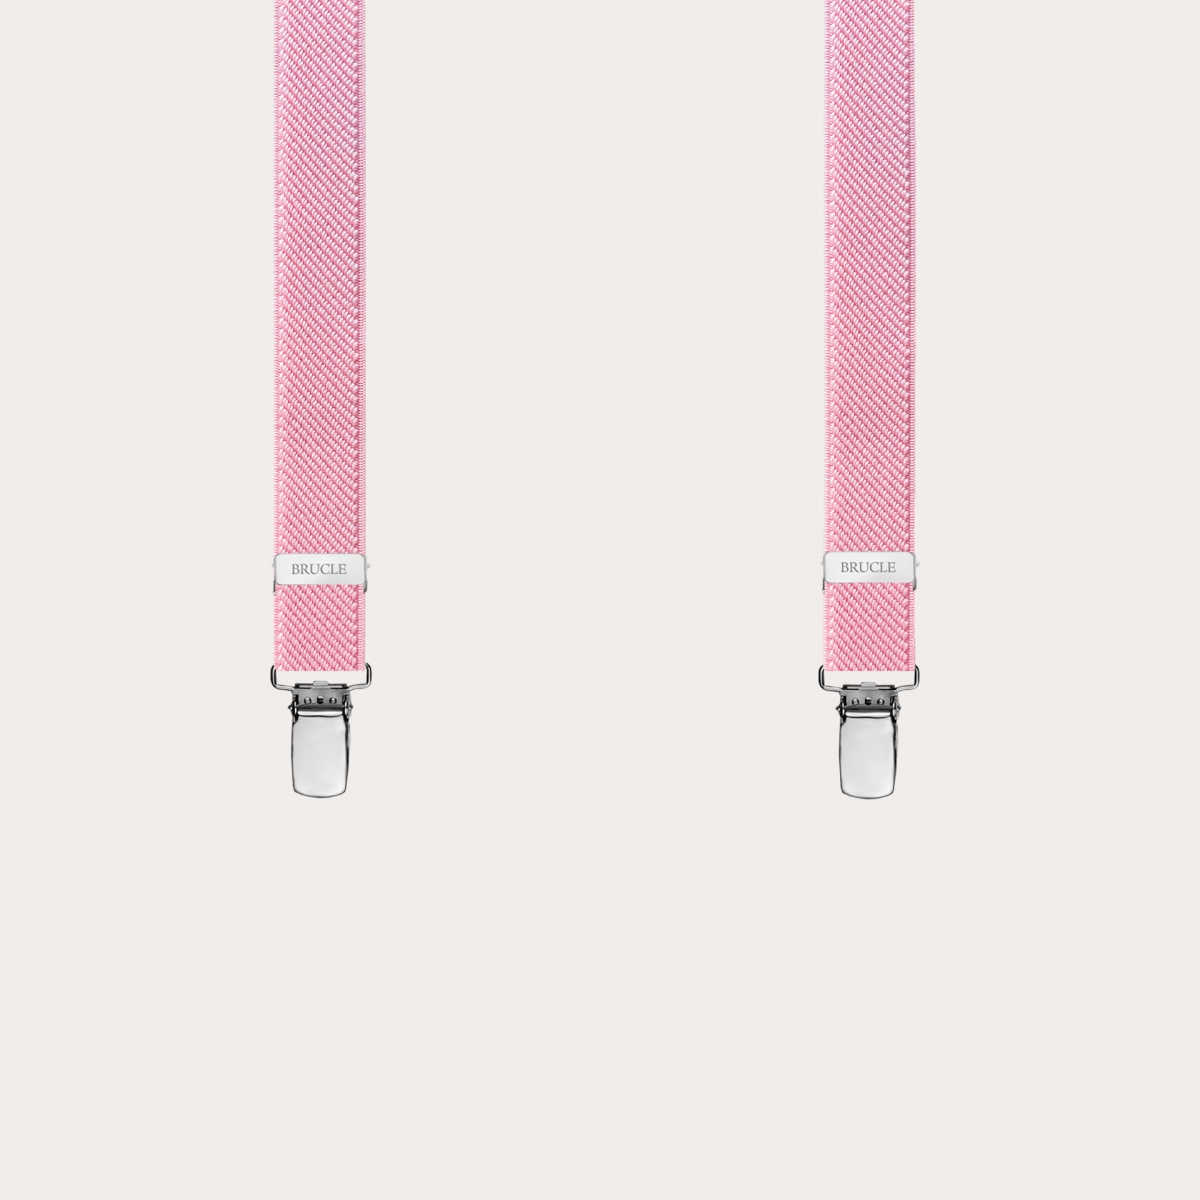 BRUCLE Unisex thin Y-shaped braces, pink